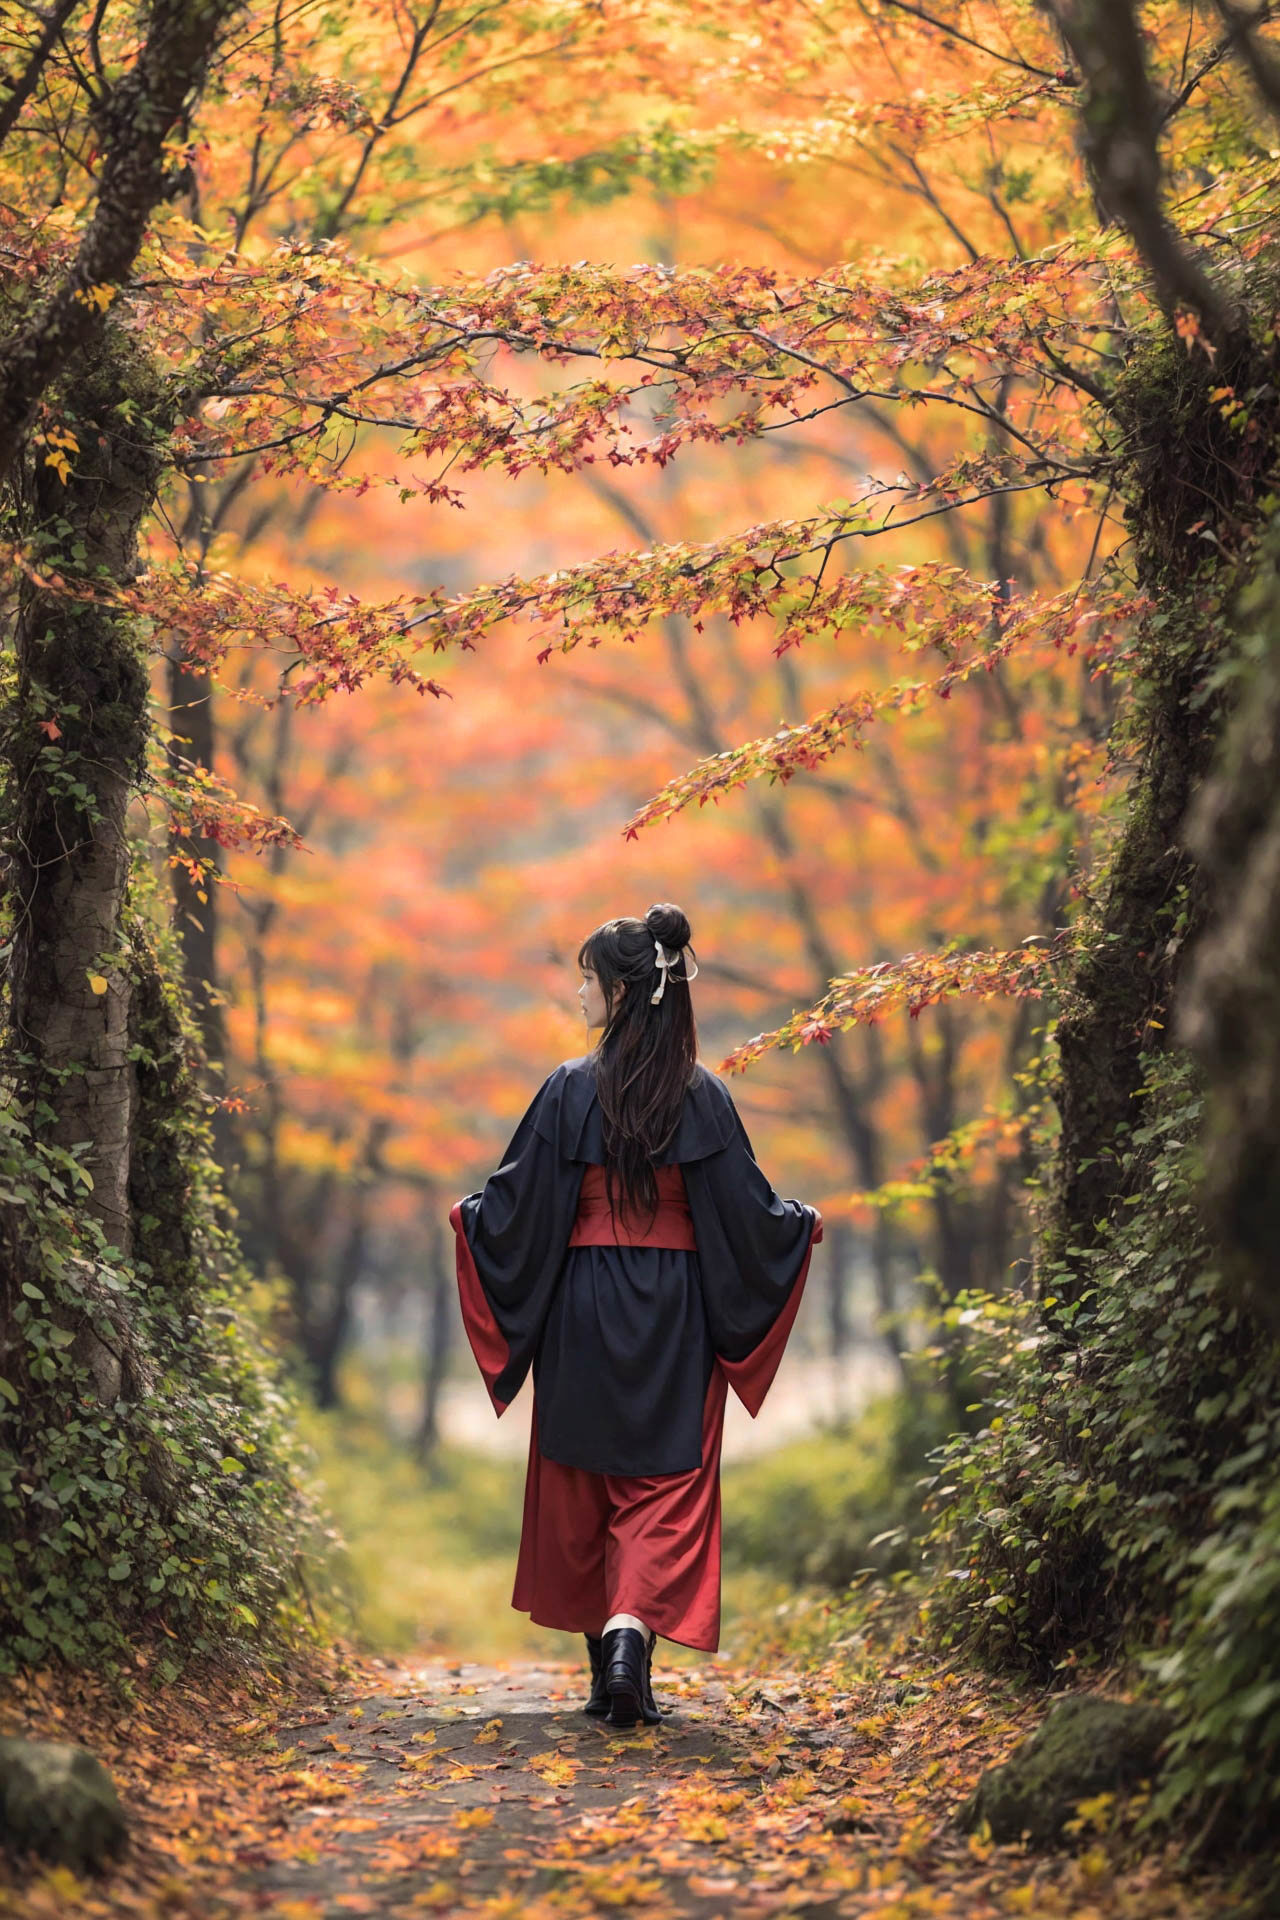 A woman wearing a kimono walks down a path surrounded by trees with red leaves.